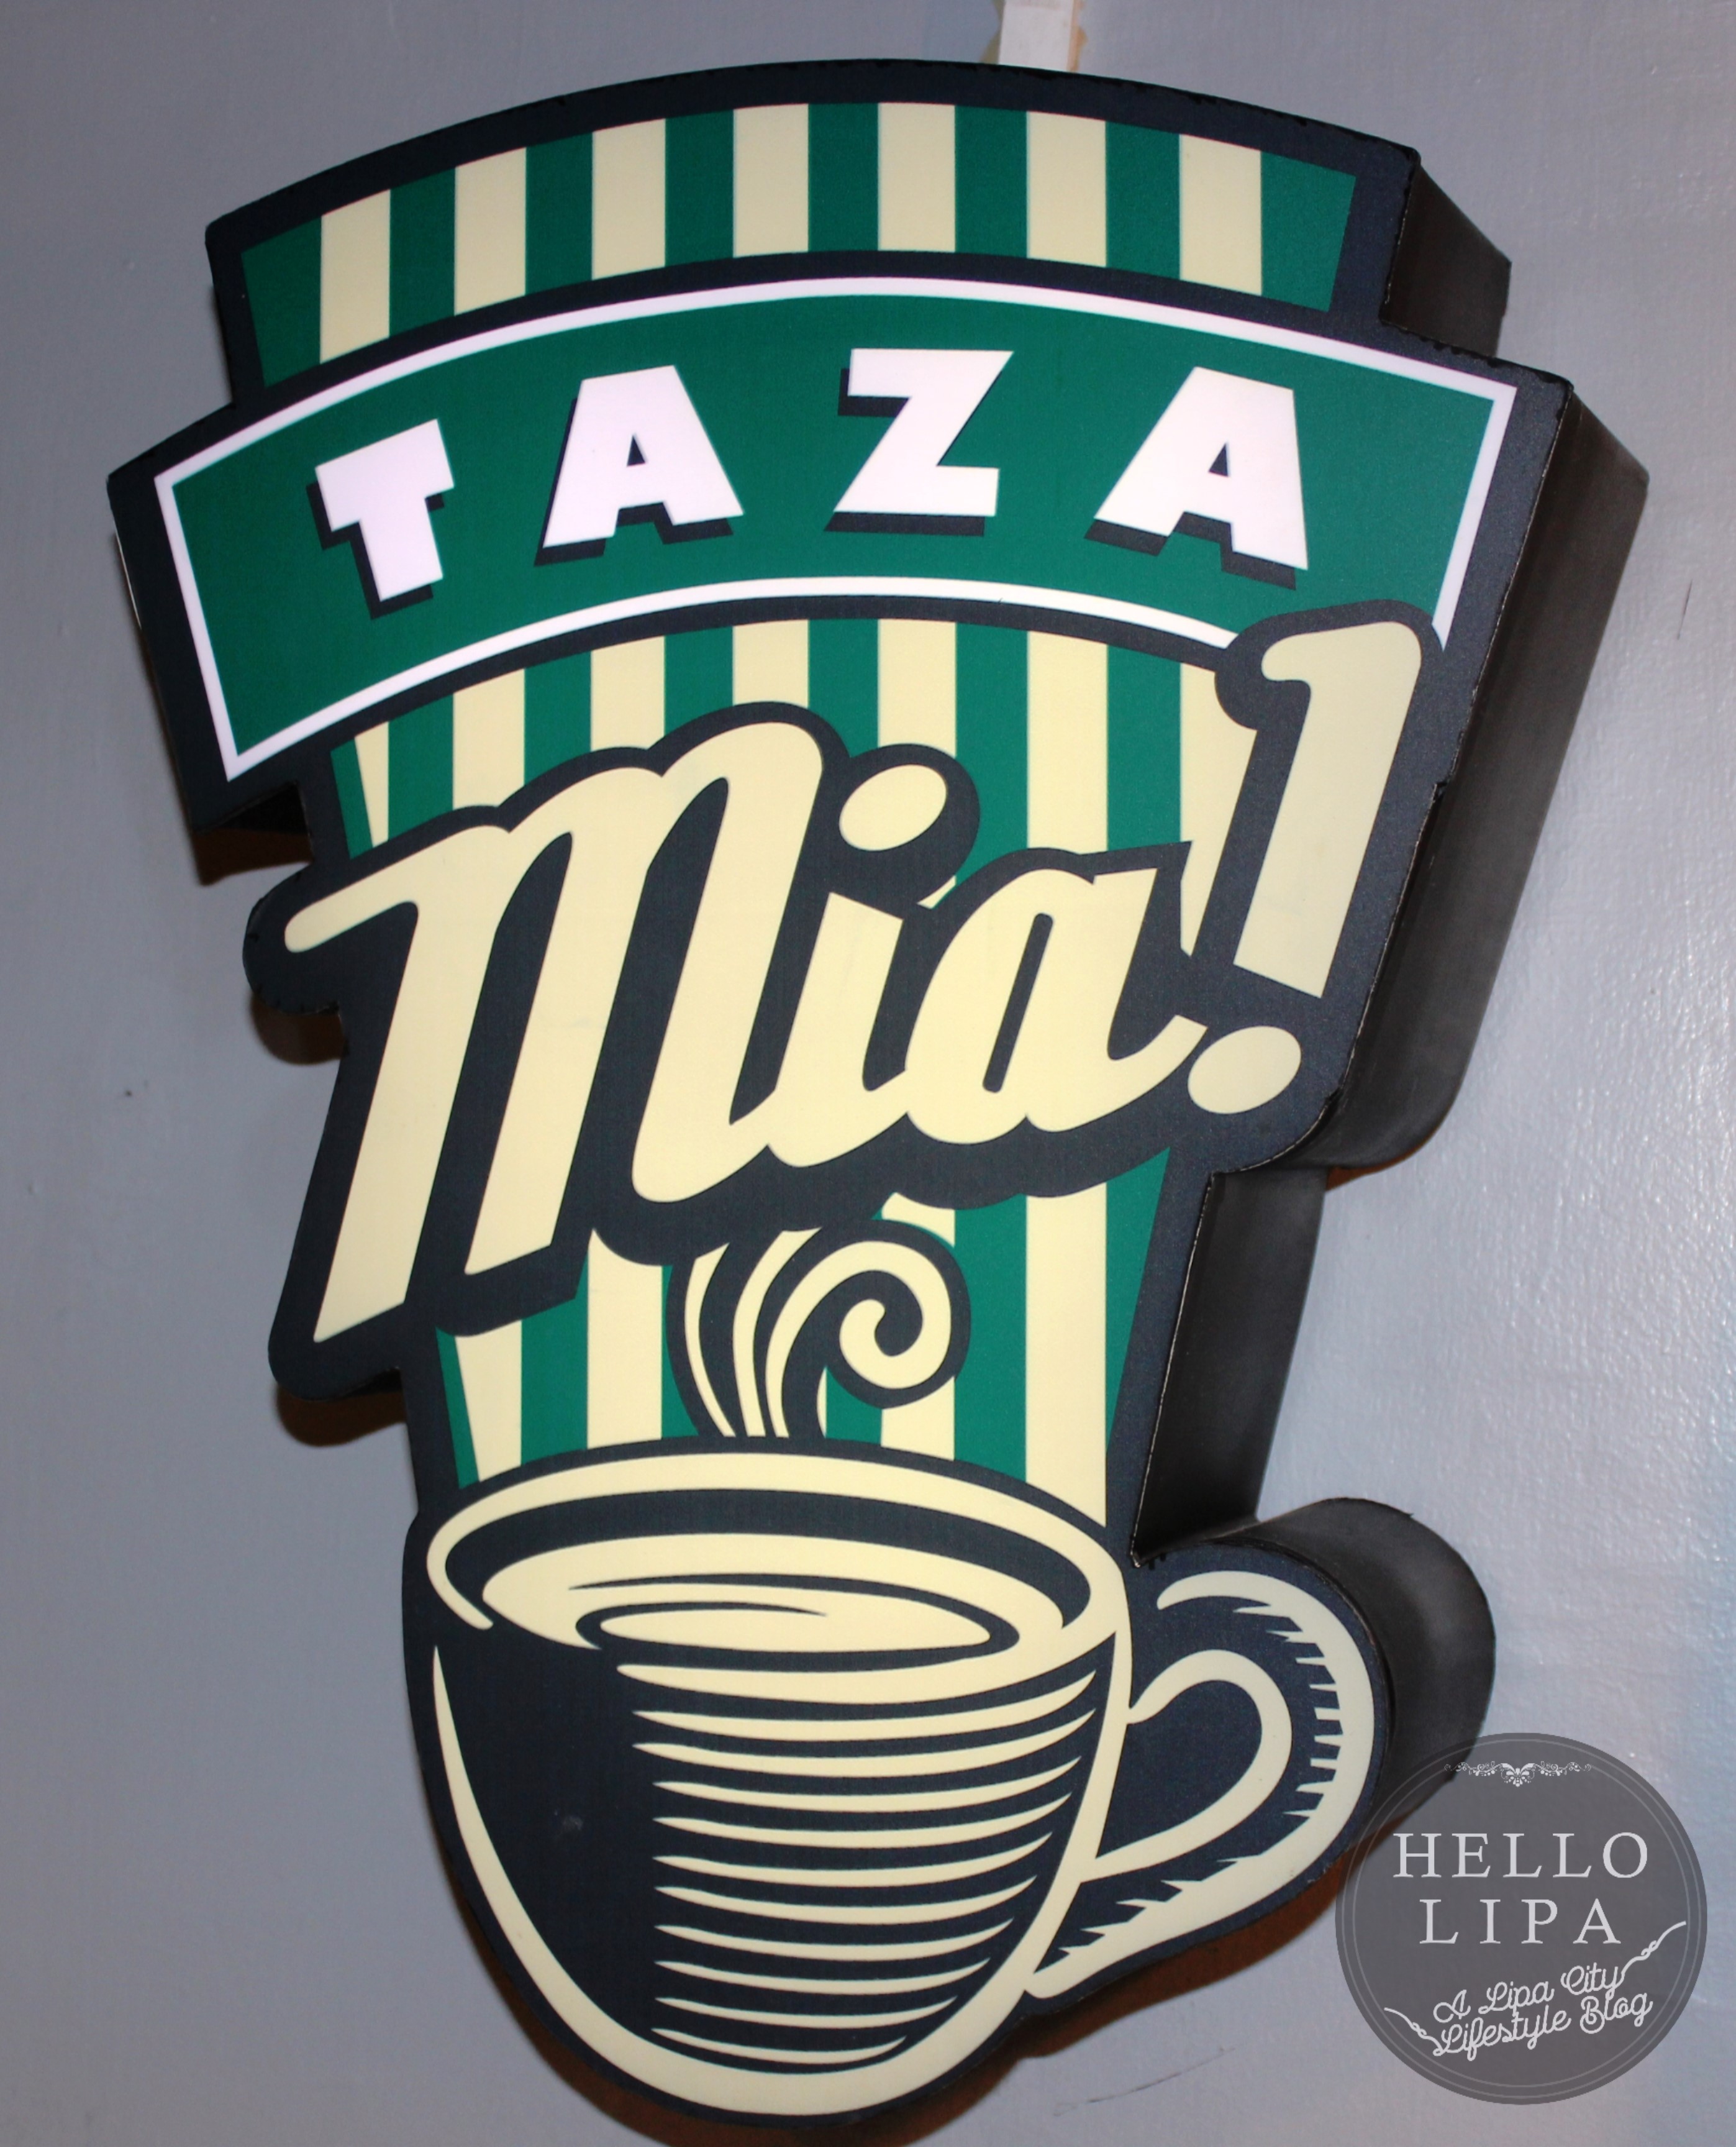 Taza Mia Coffee: A Brand Running on Passion, Consistency, Continuous Development, and Love for Coffee